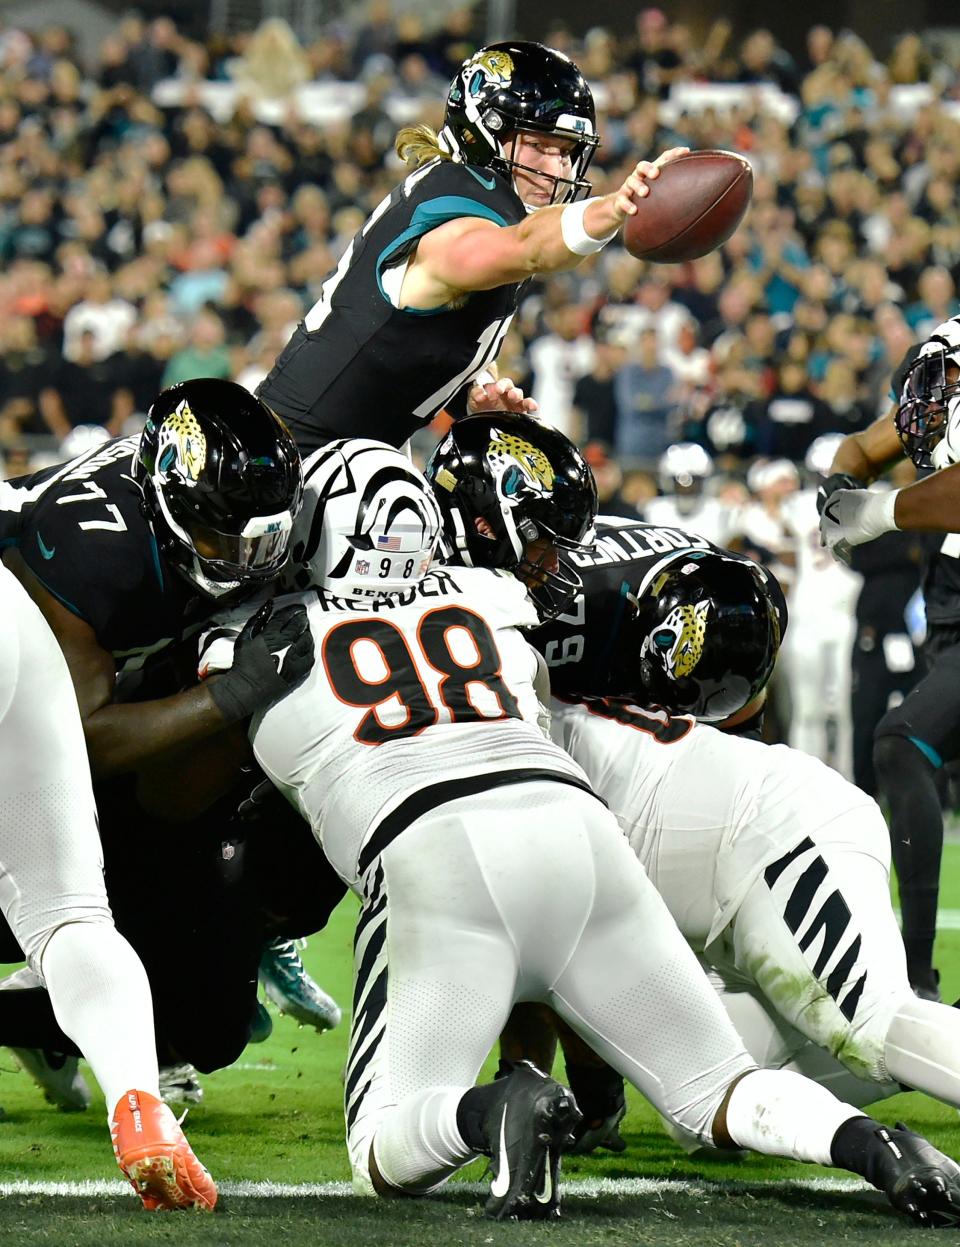 Jacksonville Jaguars quarterback Trevor Lawrence (16), seen here stretching the ball over the goal line for a touchdown against the Cincinnati Bengals, has to do a better job protecting the ball if he wants to become elite at his position. He leads the NFL with 60 turnovers the last three seasons.